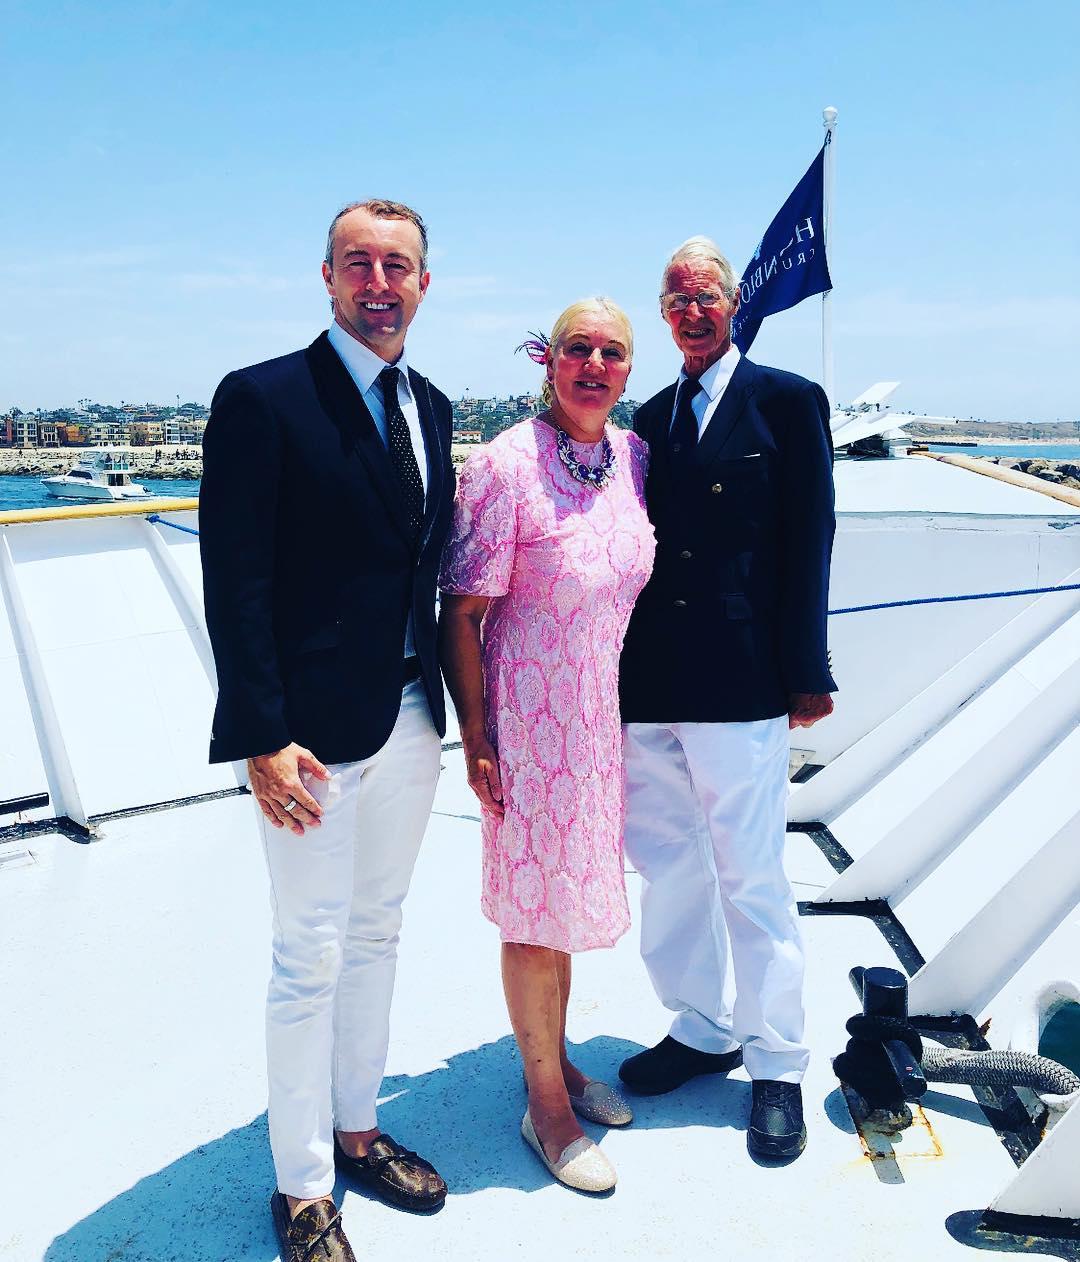 Prince Mario-Max Schaumburg-L. on : “Sunday is Yacht Funday ❤️ The Princely Family wishes you a happy summer ! #princemariomaxschaumburglippe #royals #royalty #fit…”: 